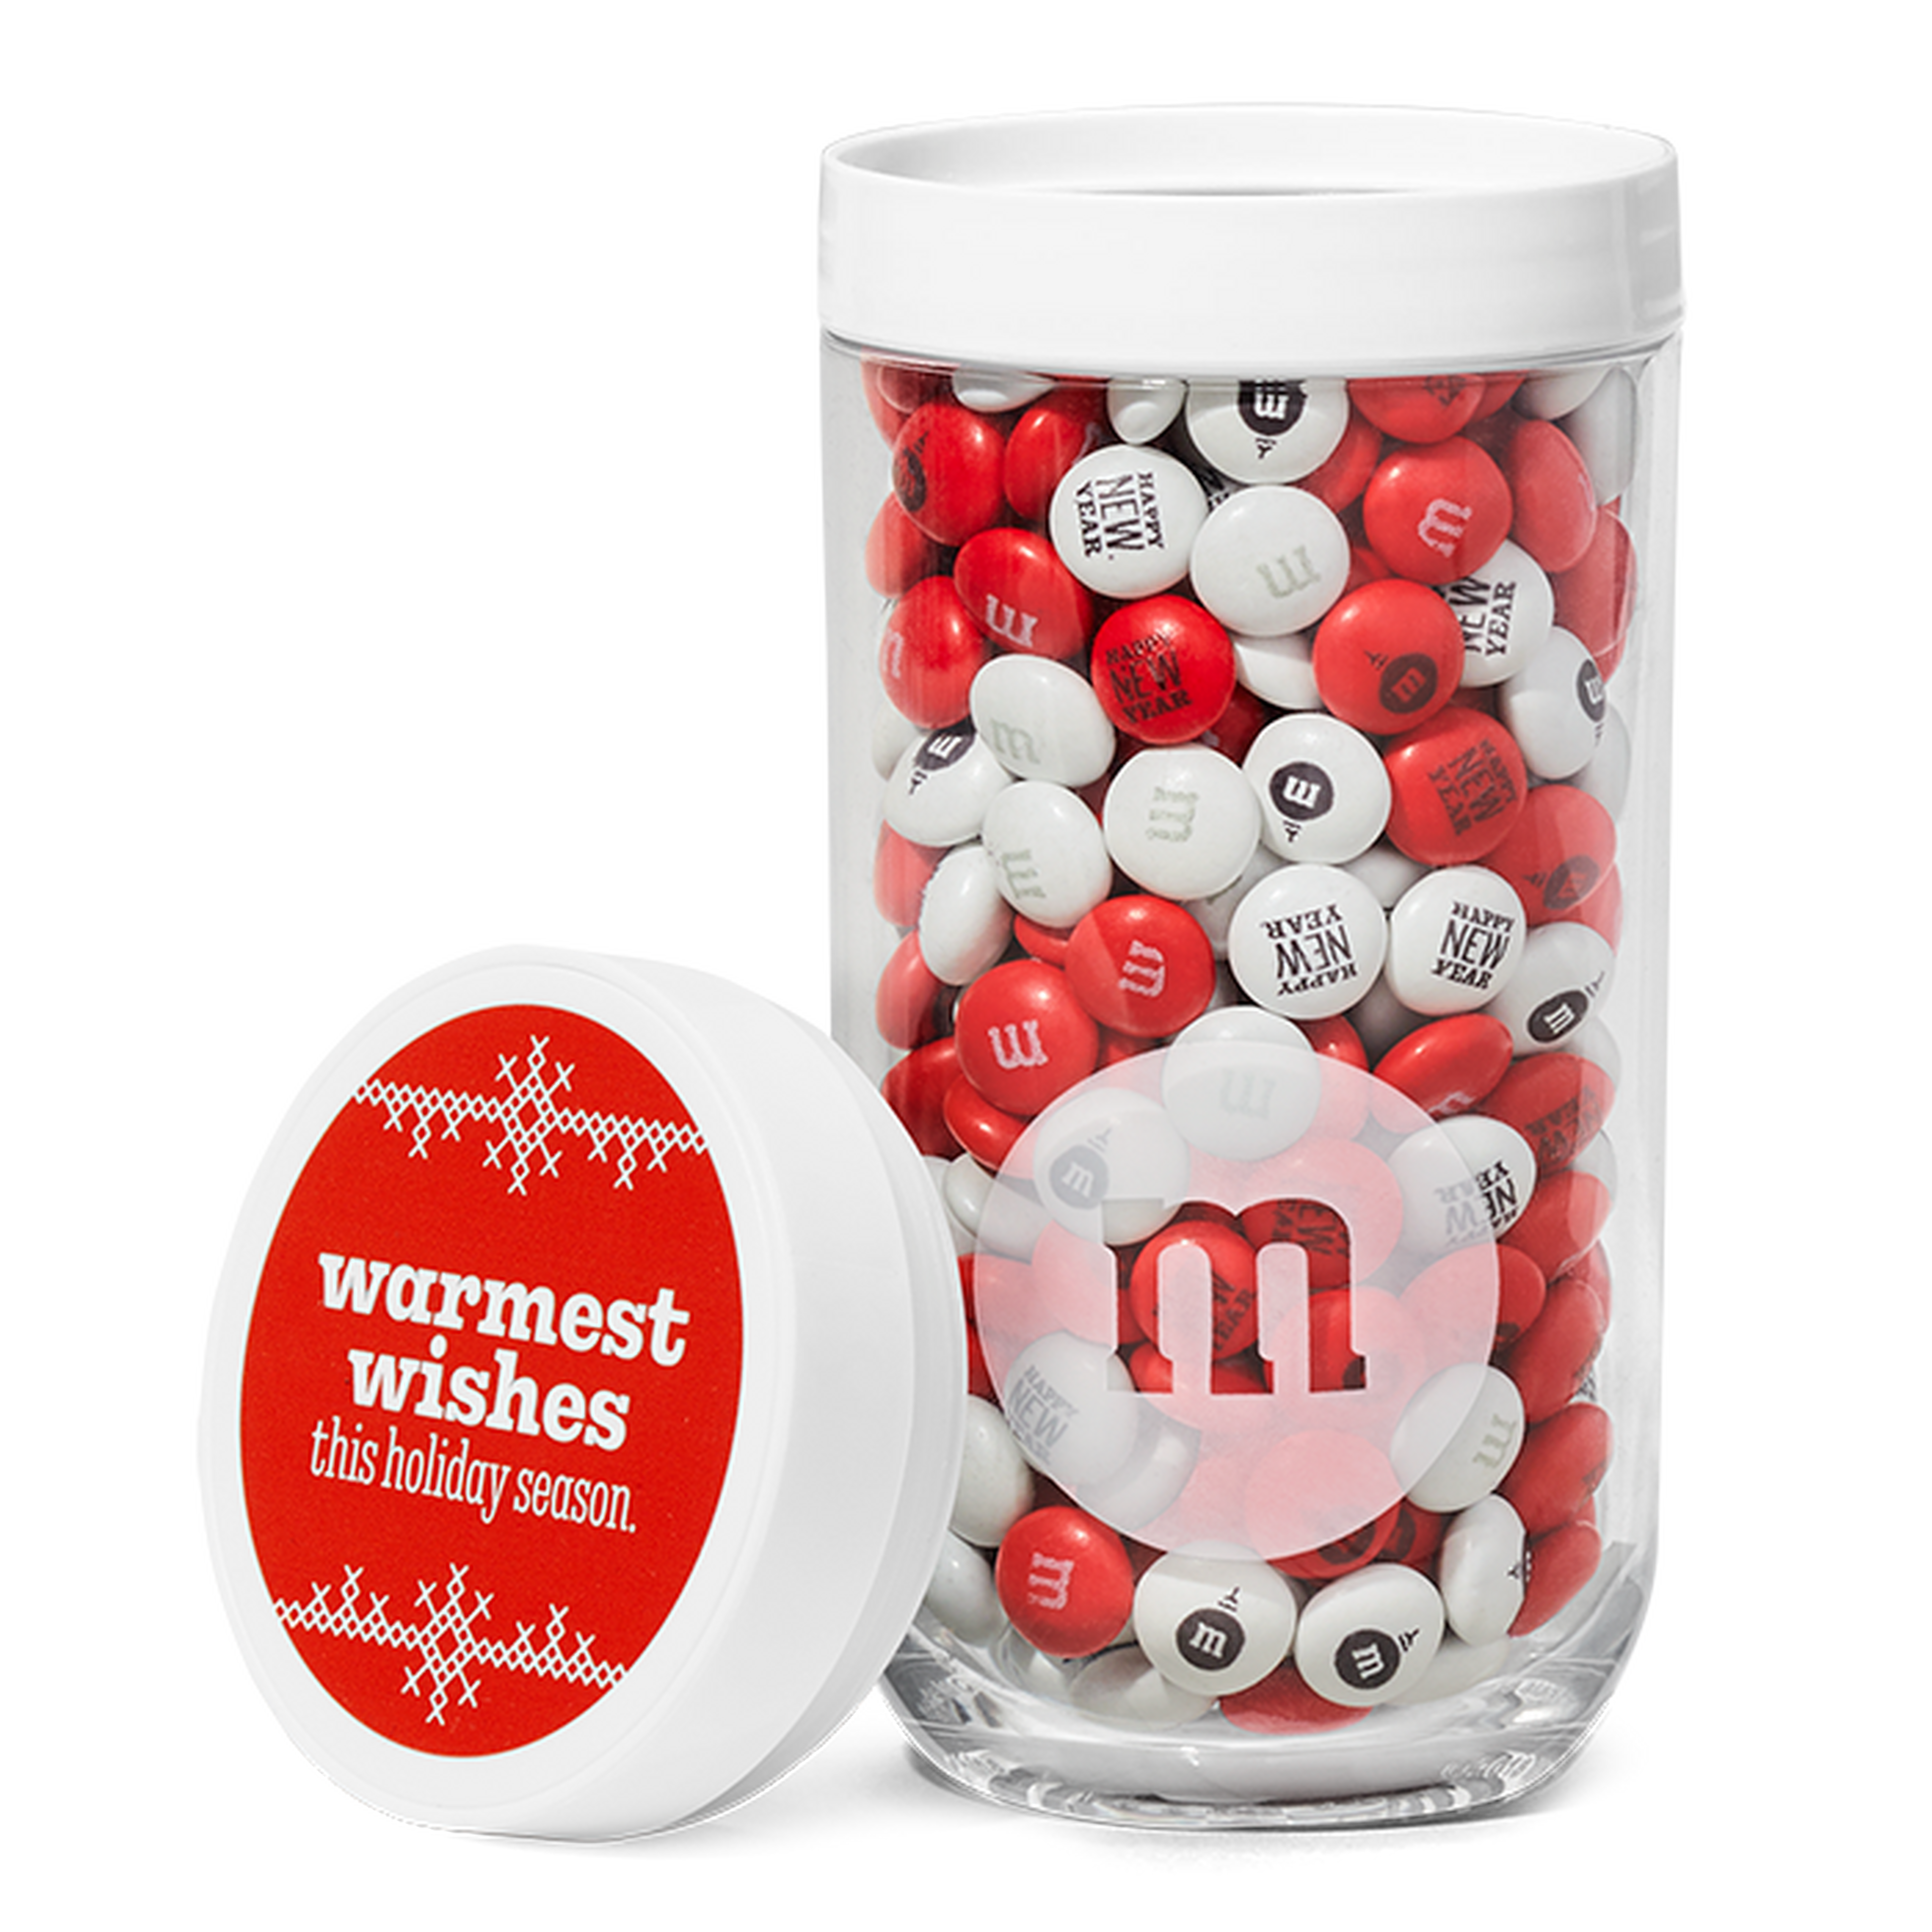 M&M Tube Party Favors - Personalized Custom M&M Tube Party Favors & Gifts